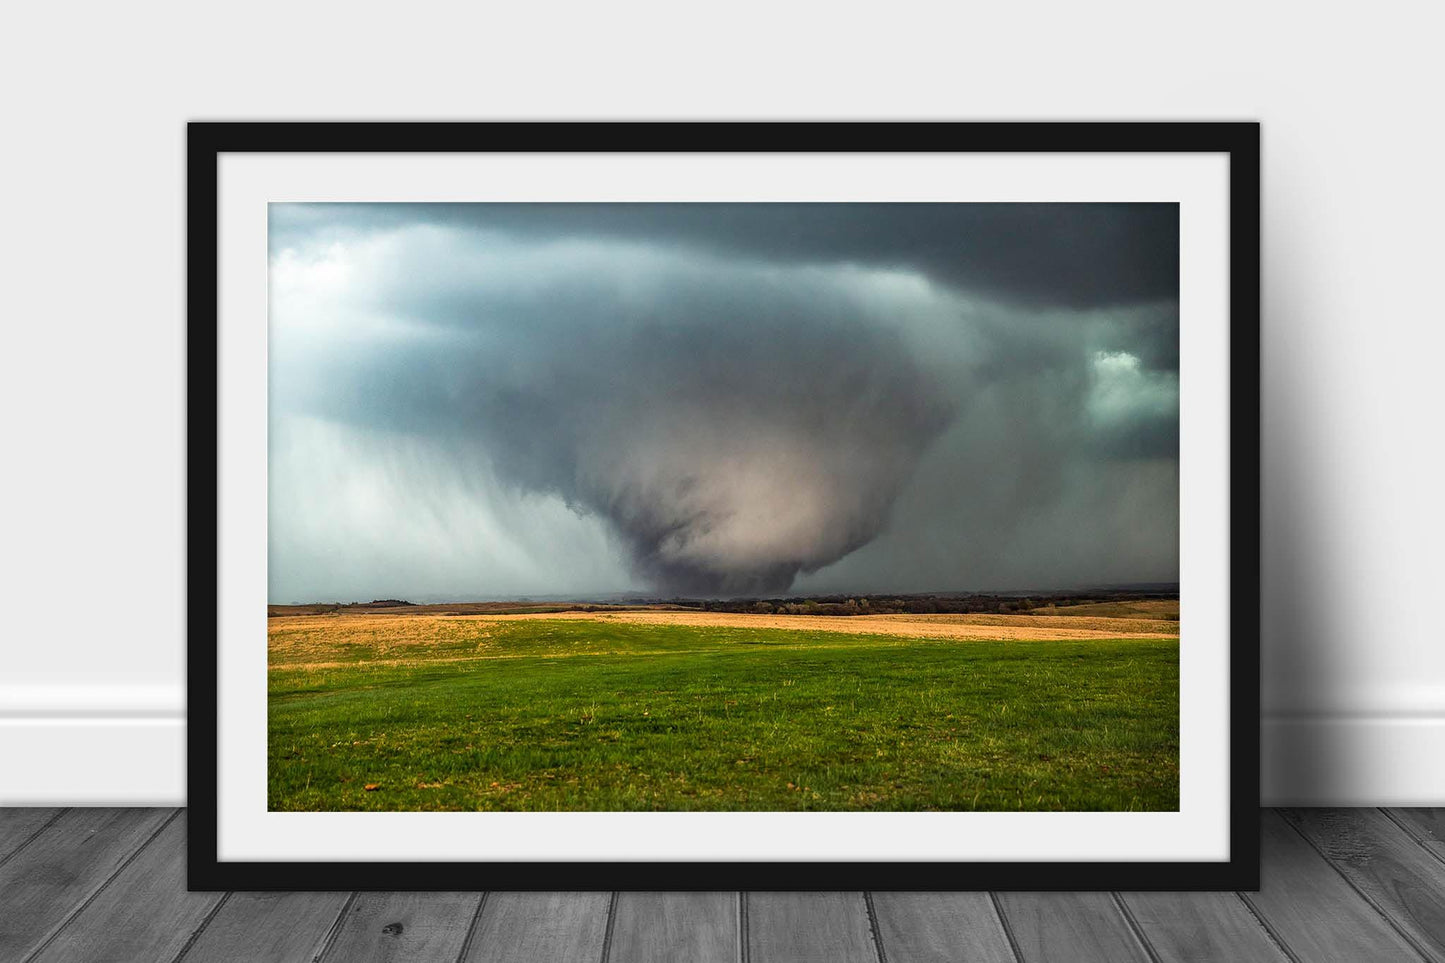 Framed storm print of a large tornado rumbling over open plains on a stormy spring day in Kansas by Sean Ramsey of Southern Plains Photography.